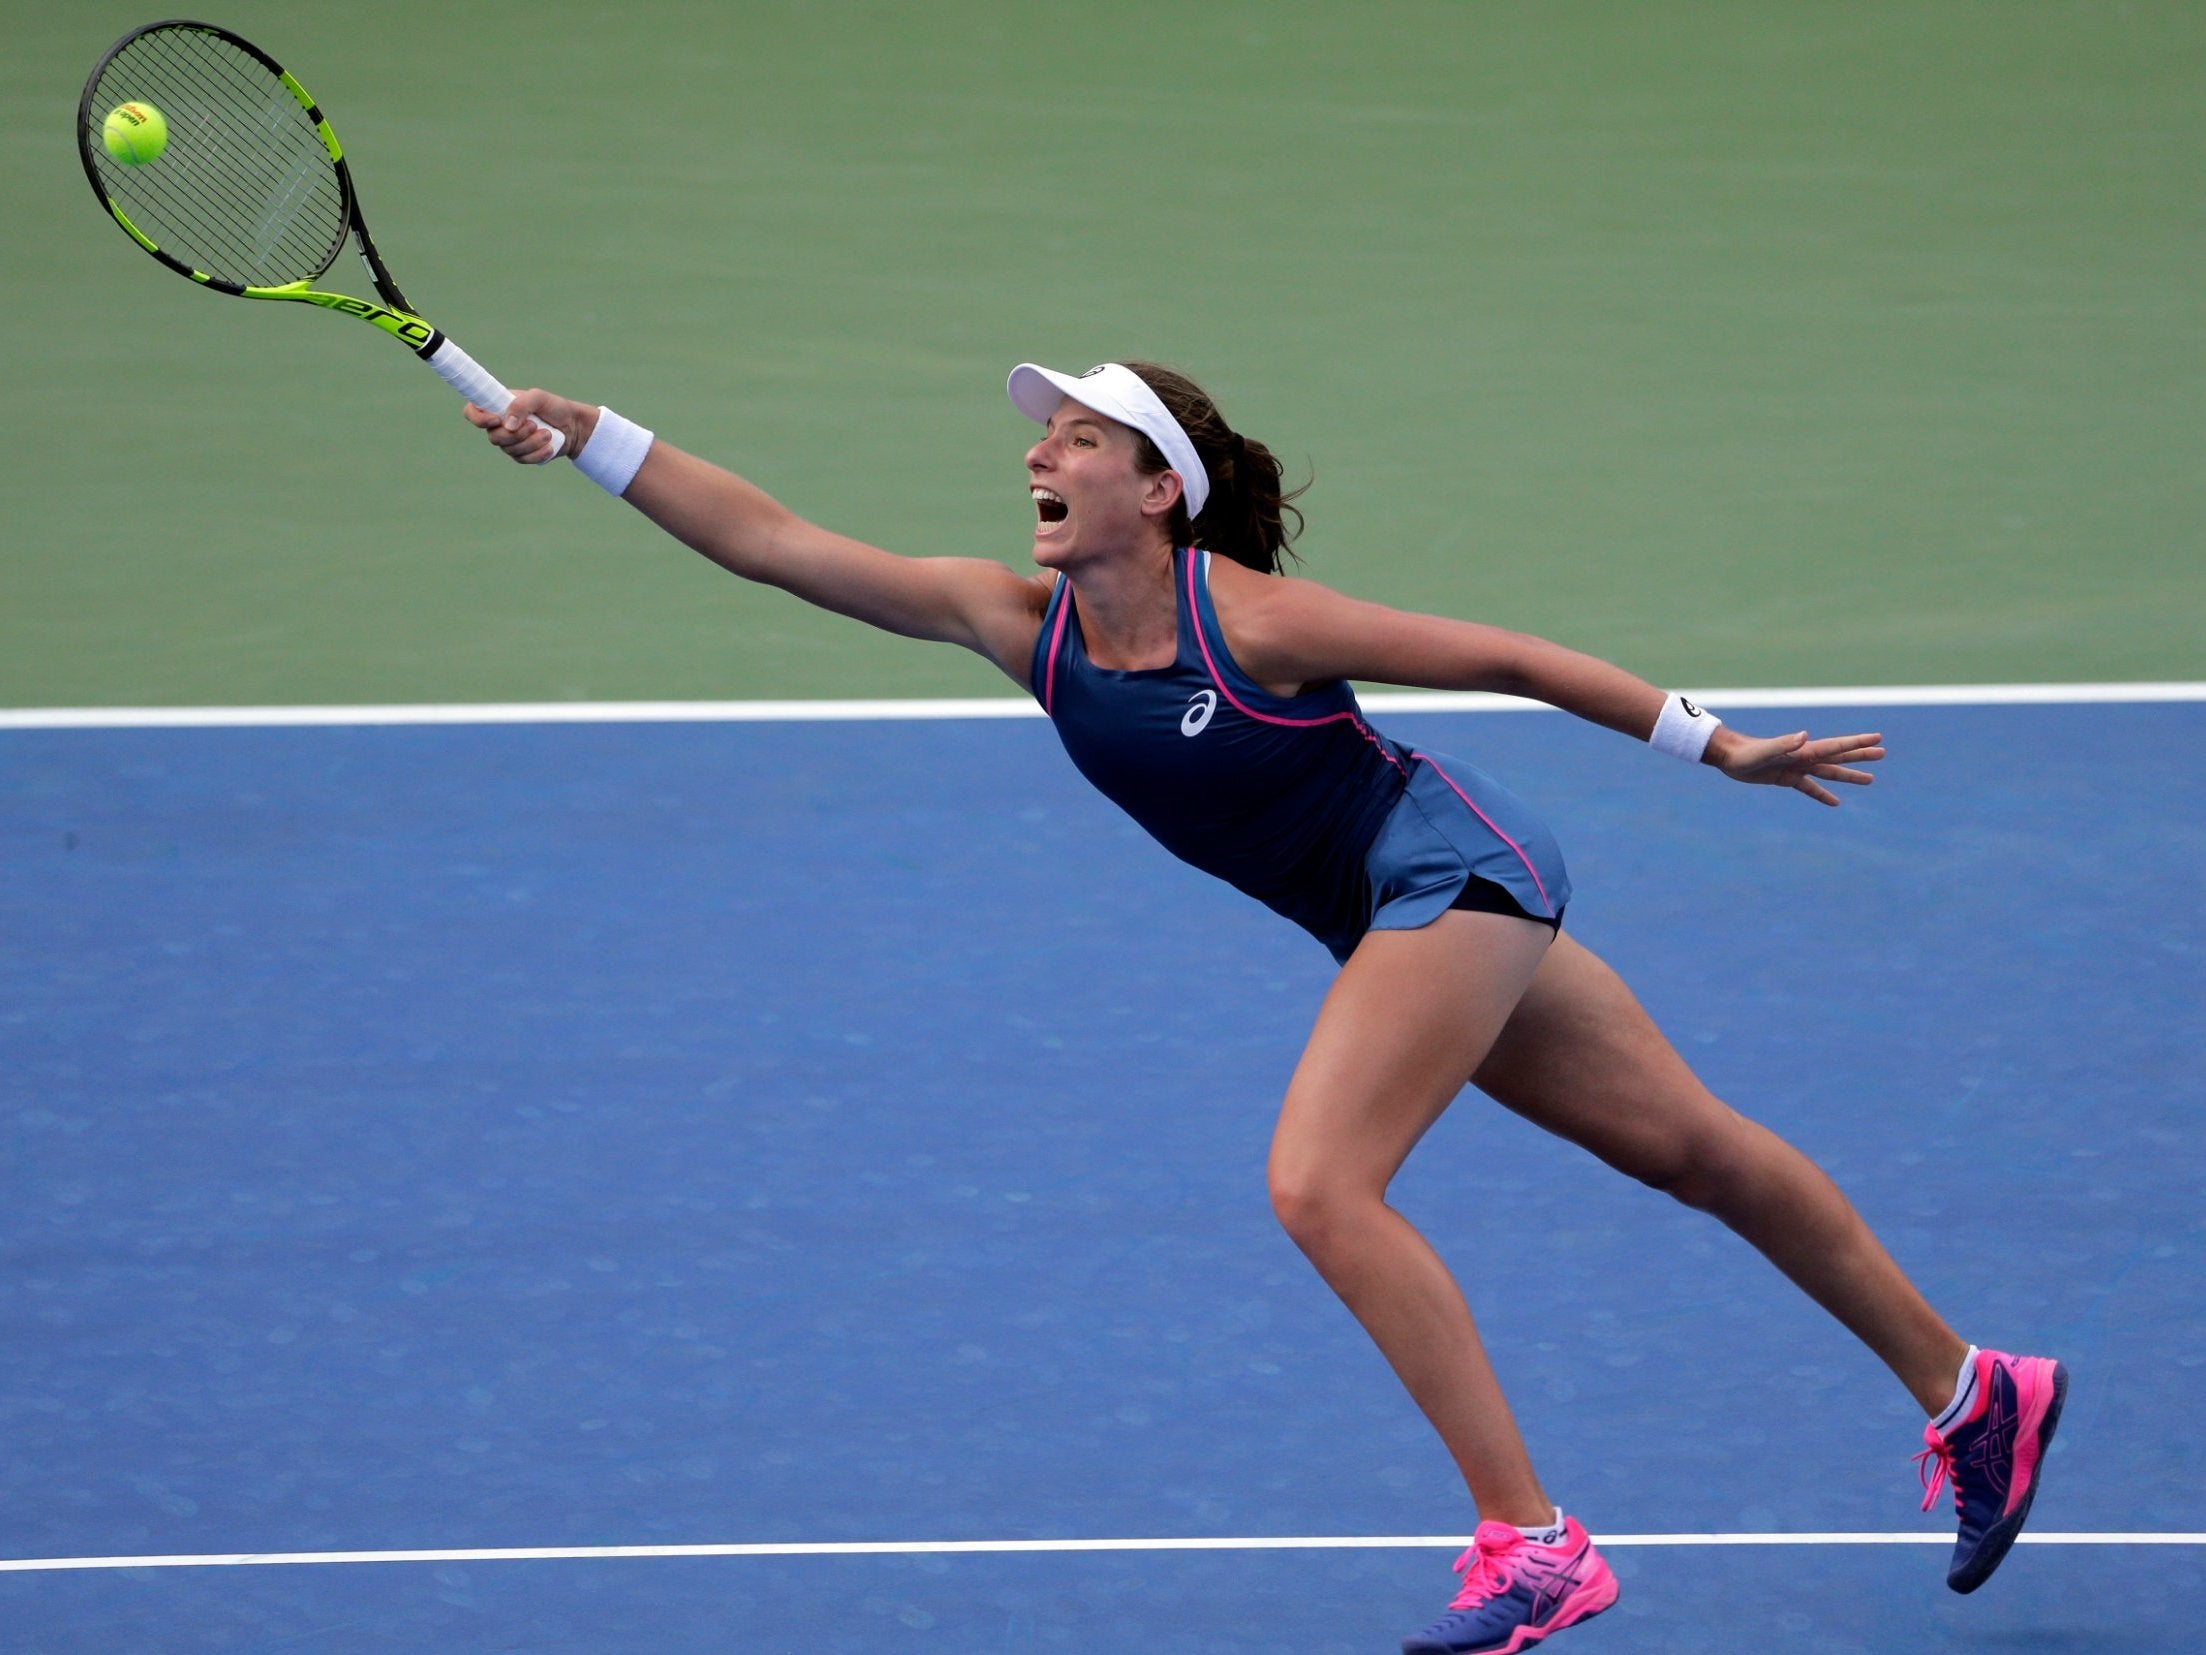 Konta has won just two matches in her last five Grand Slam tournaments